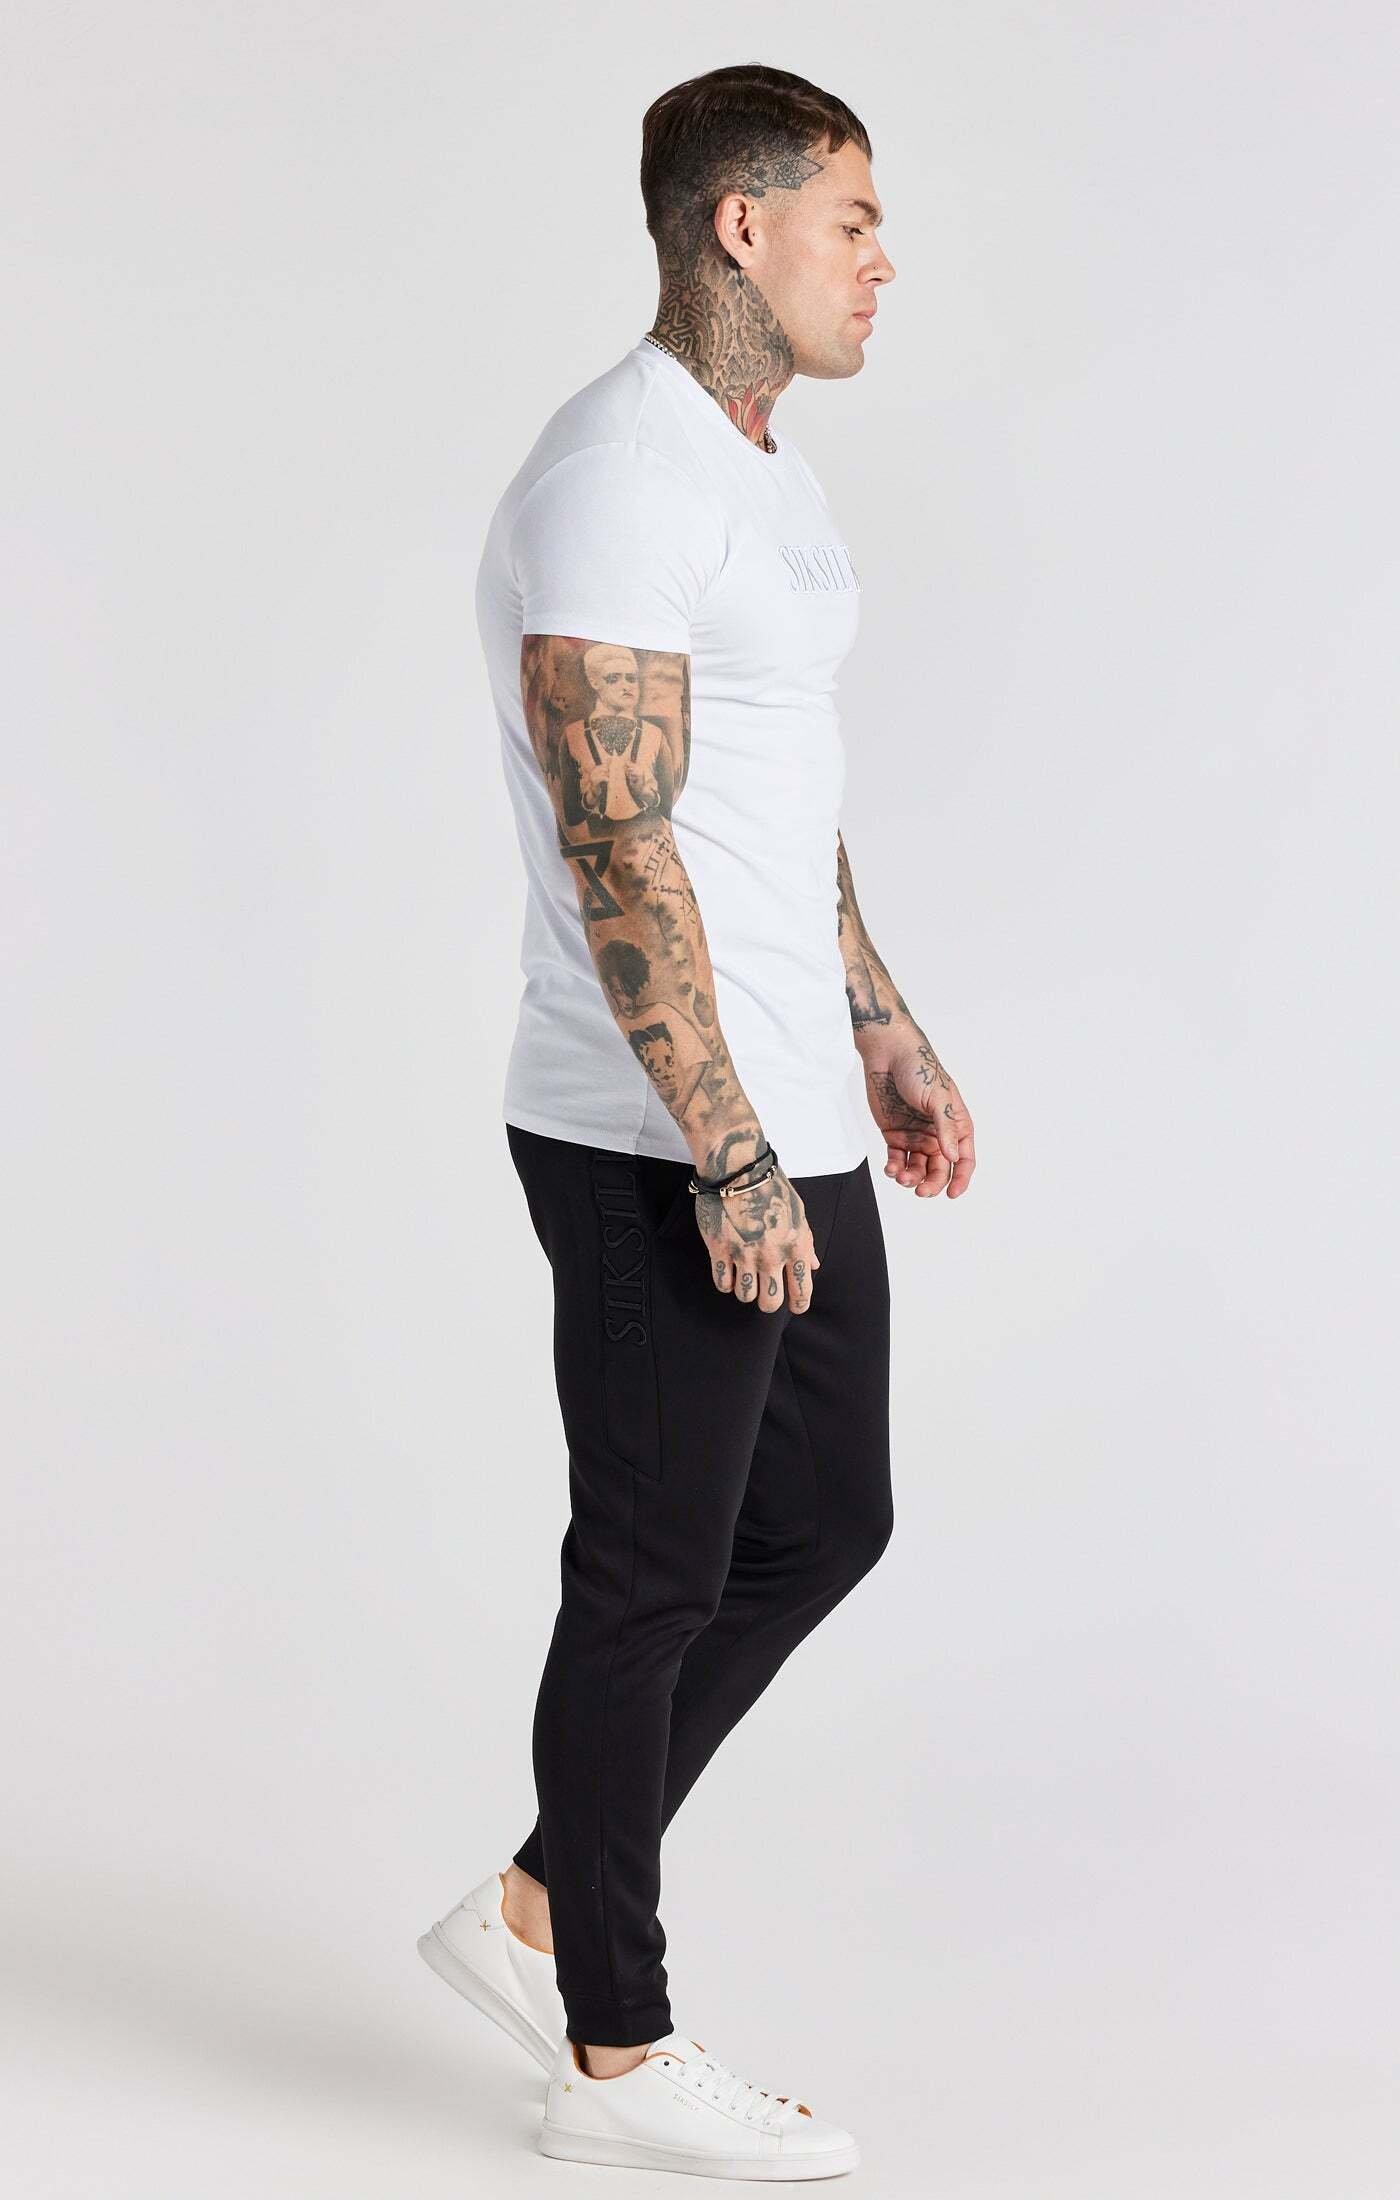 Sik Silk  T-Shirt White Embroidered Muscle Fit T-Shirt 